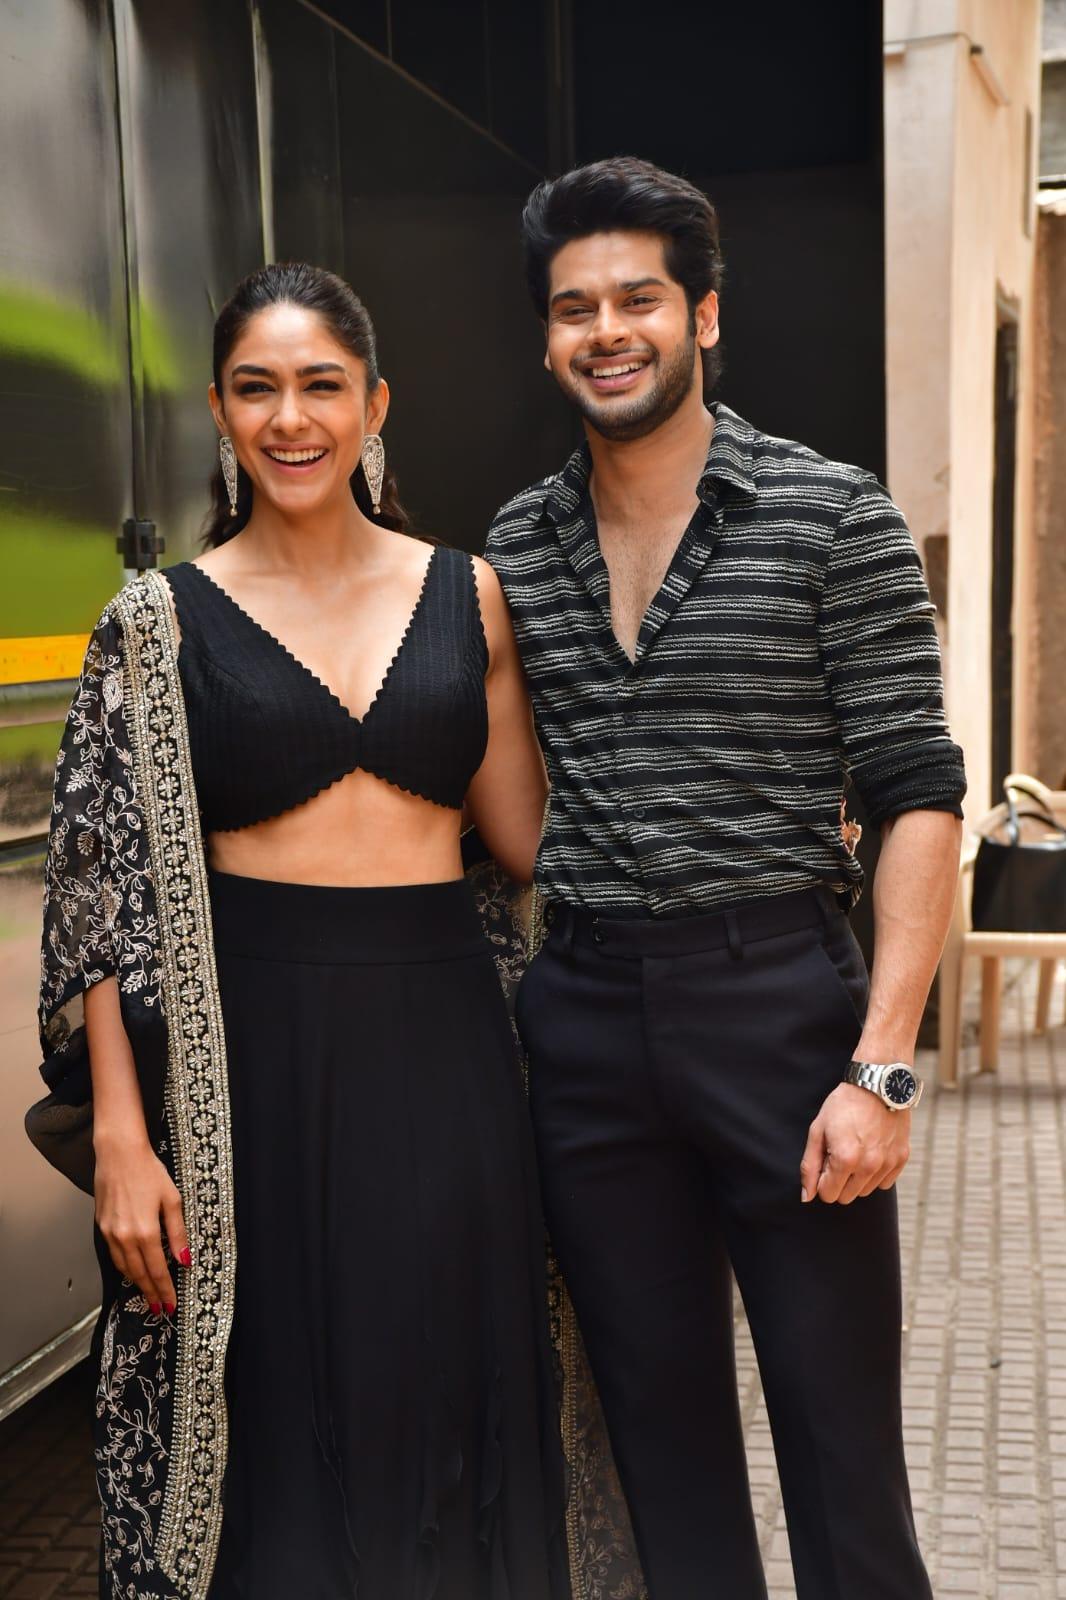 Mrunal Thakur and Abhimanyu Dassai wore matching black outfits as they went to promote their film 'Aankh Micholi'